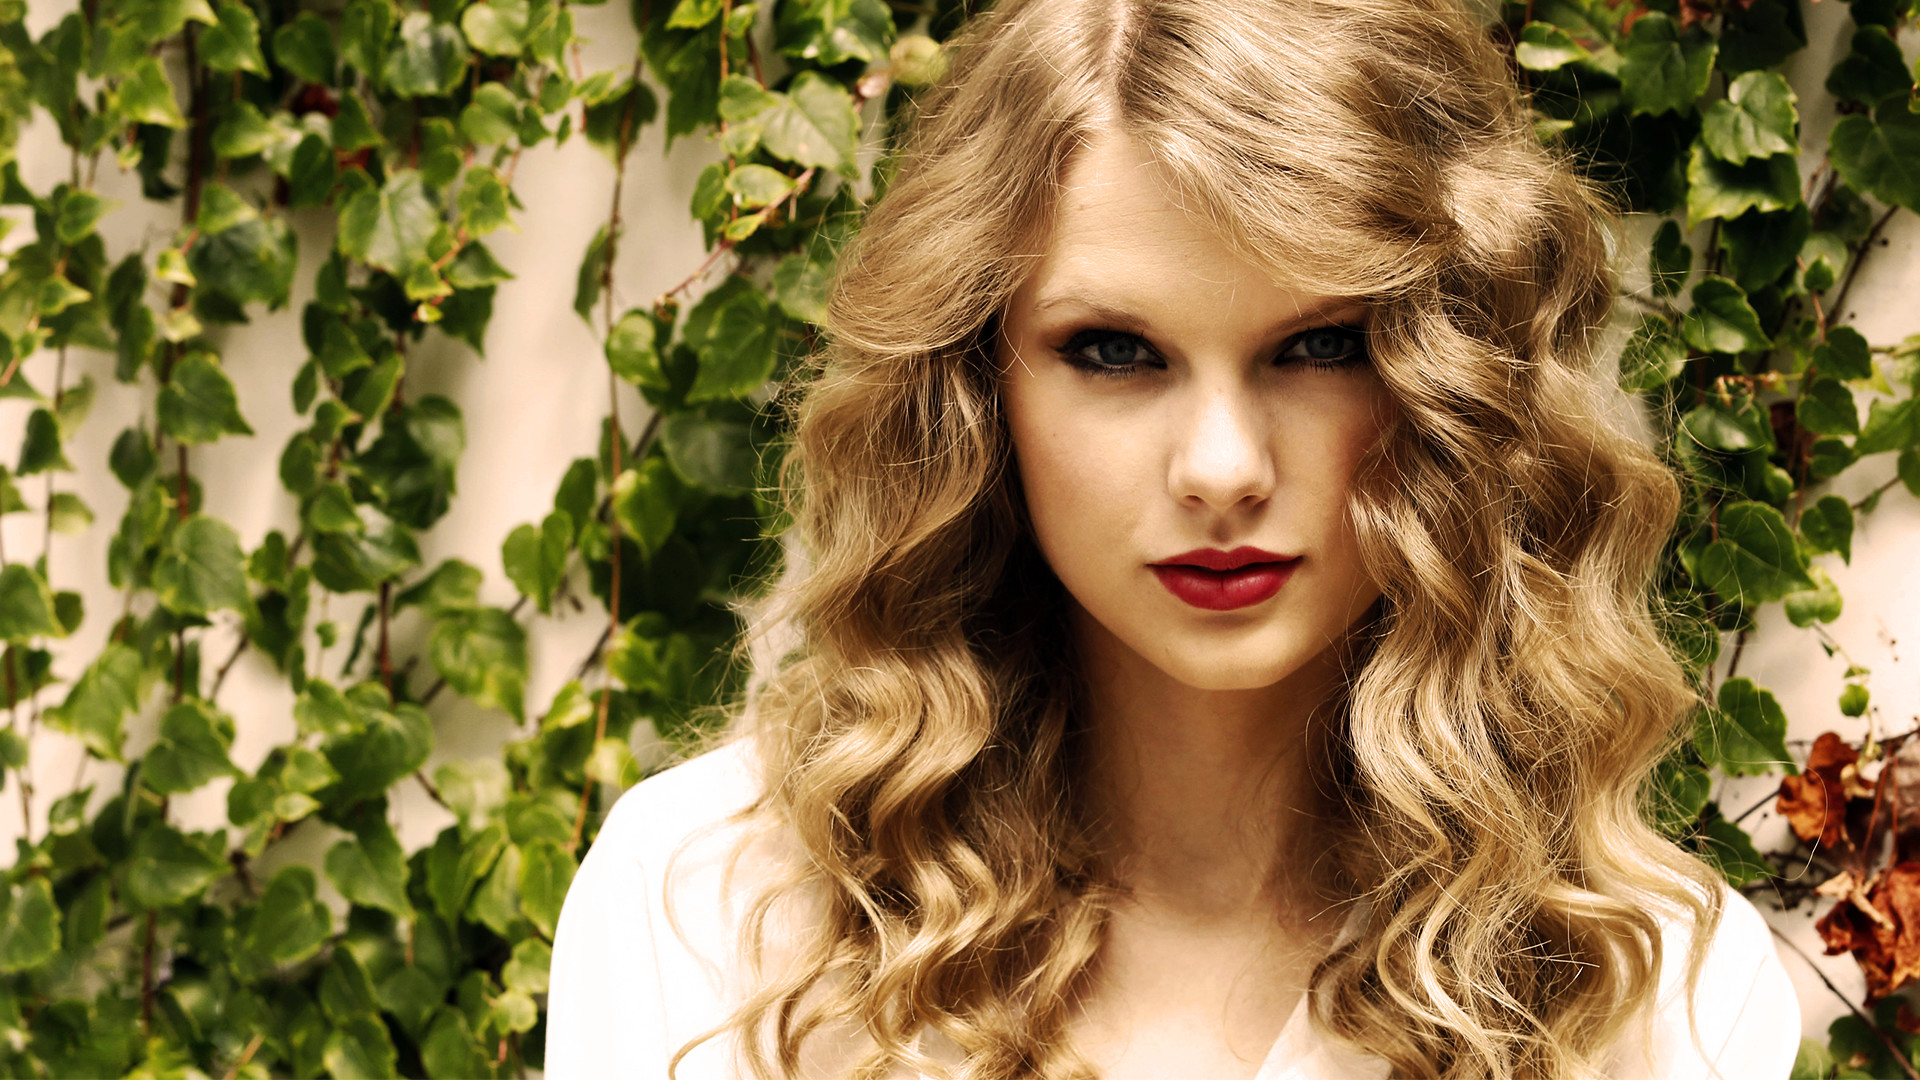 taylor swift hd android wallpapers wallpaper cave on taylor swift mobile wallpapers